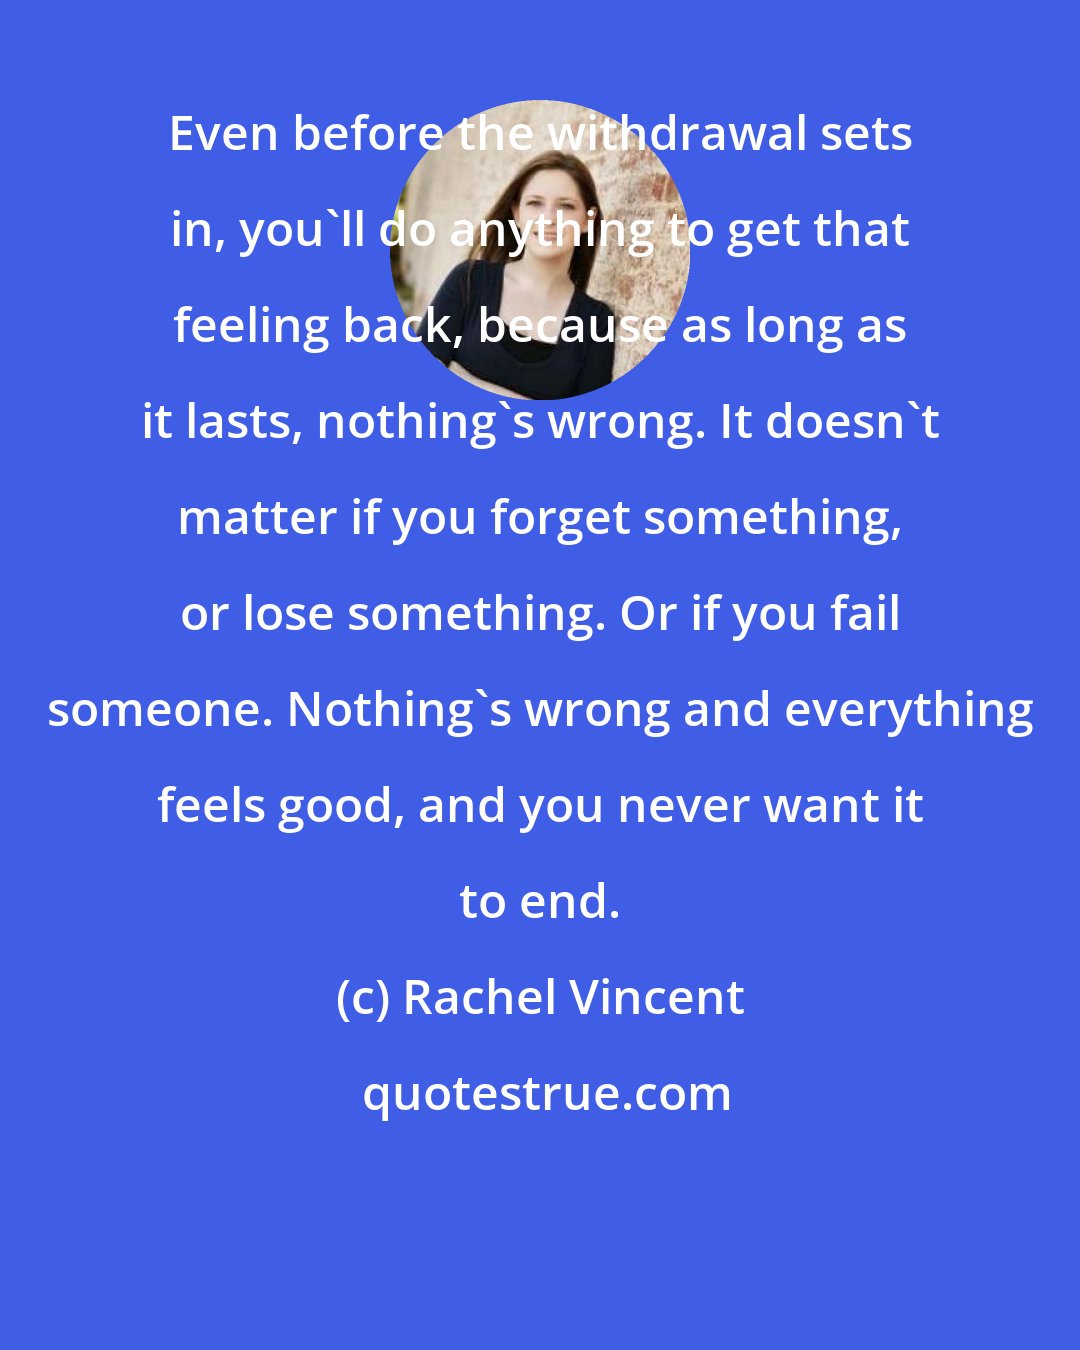 Rachel Vincent: Even before the withdrawal sets in, you'll do anything to get that feeling back, because as long as it lasts, nothing's wrong. It doesn't matter if you forget something, or lose something. Or if you fail someone. Nothing's wrong and everything feels good, and you never want it to end.